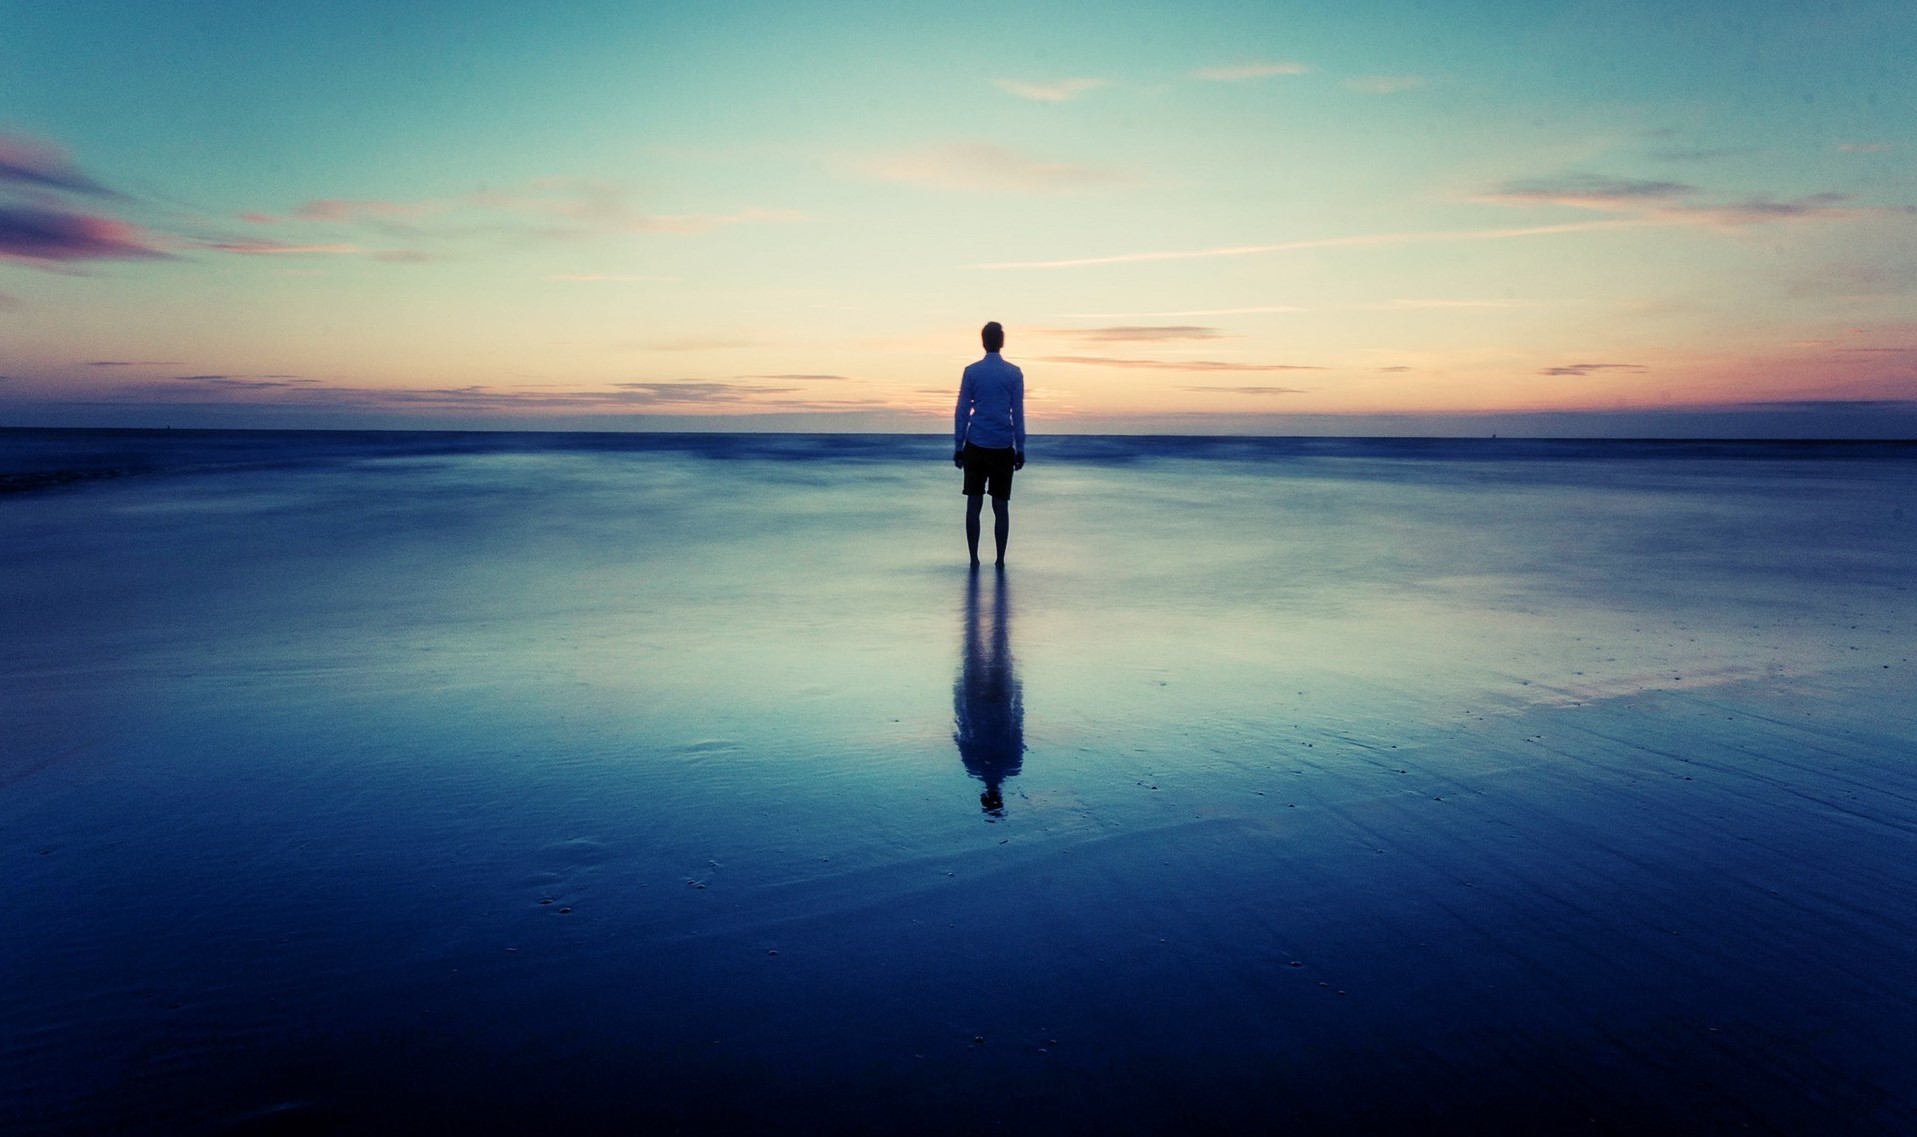 16561-alone-at-the-beach-1920x1200-photography-wallpaper.jpg